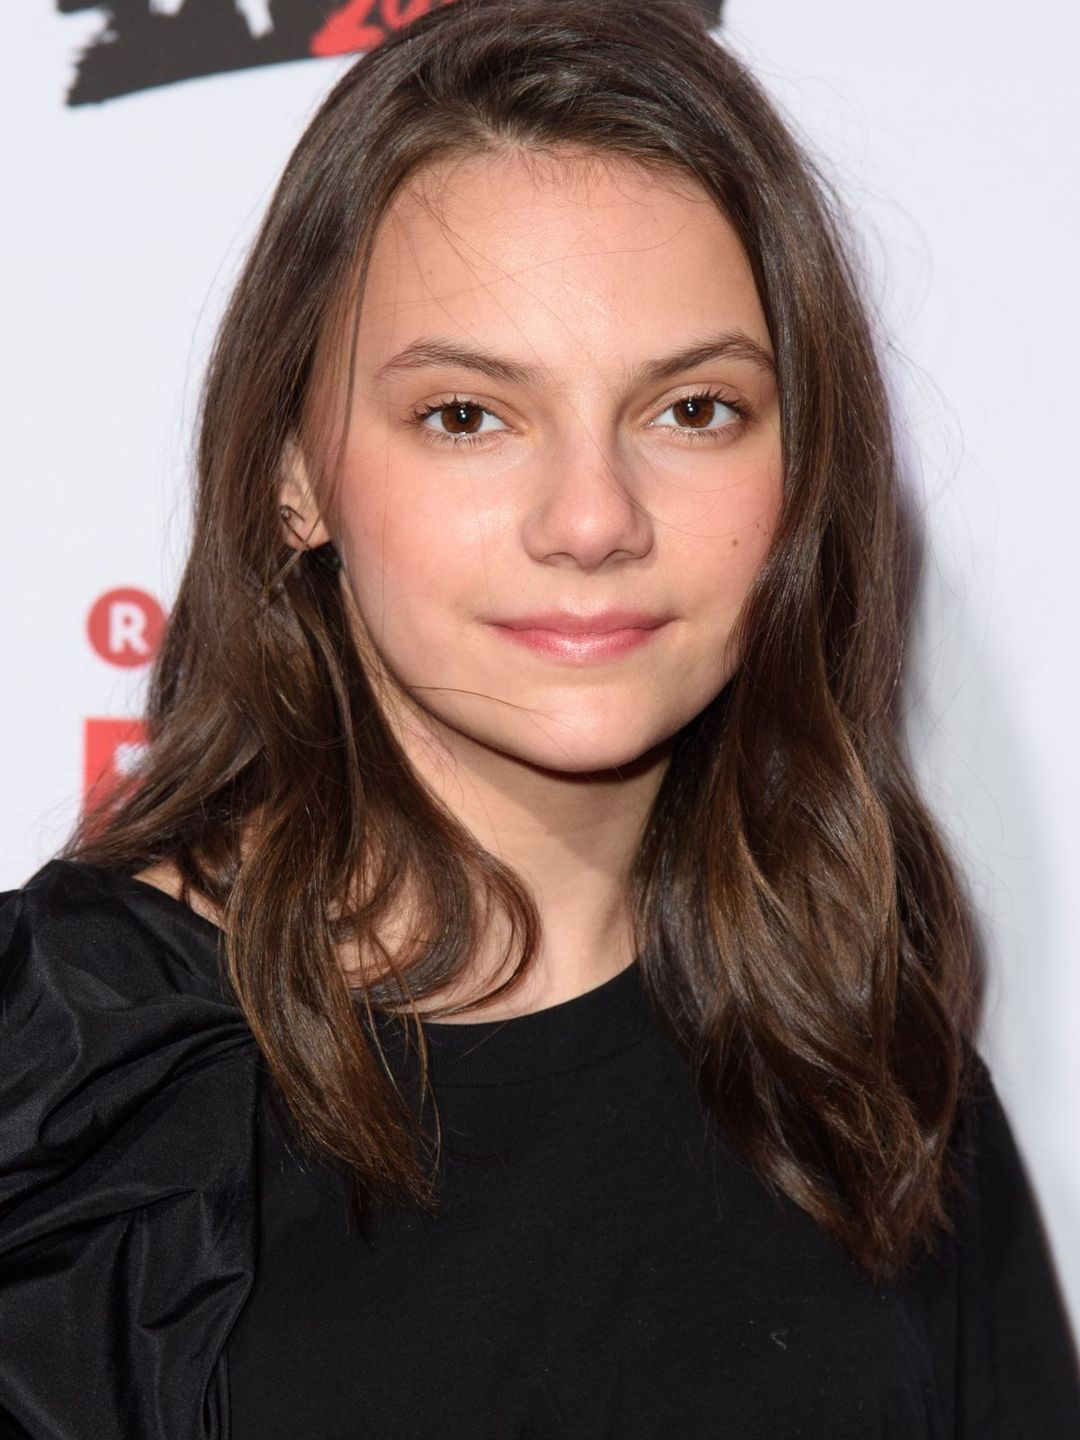 Dafne Keen in real life